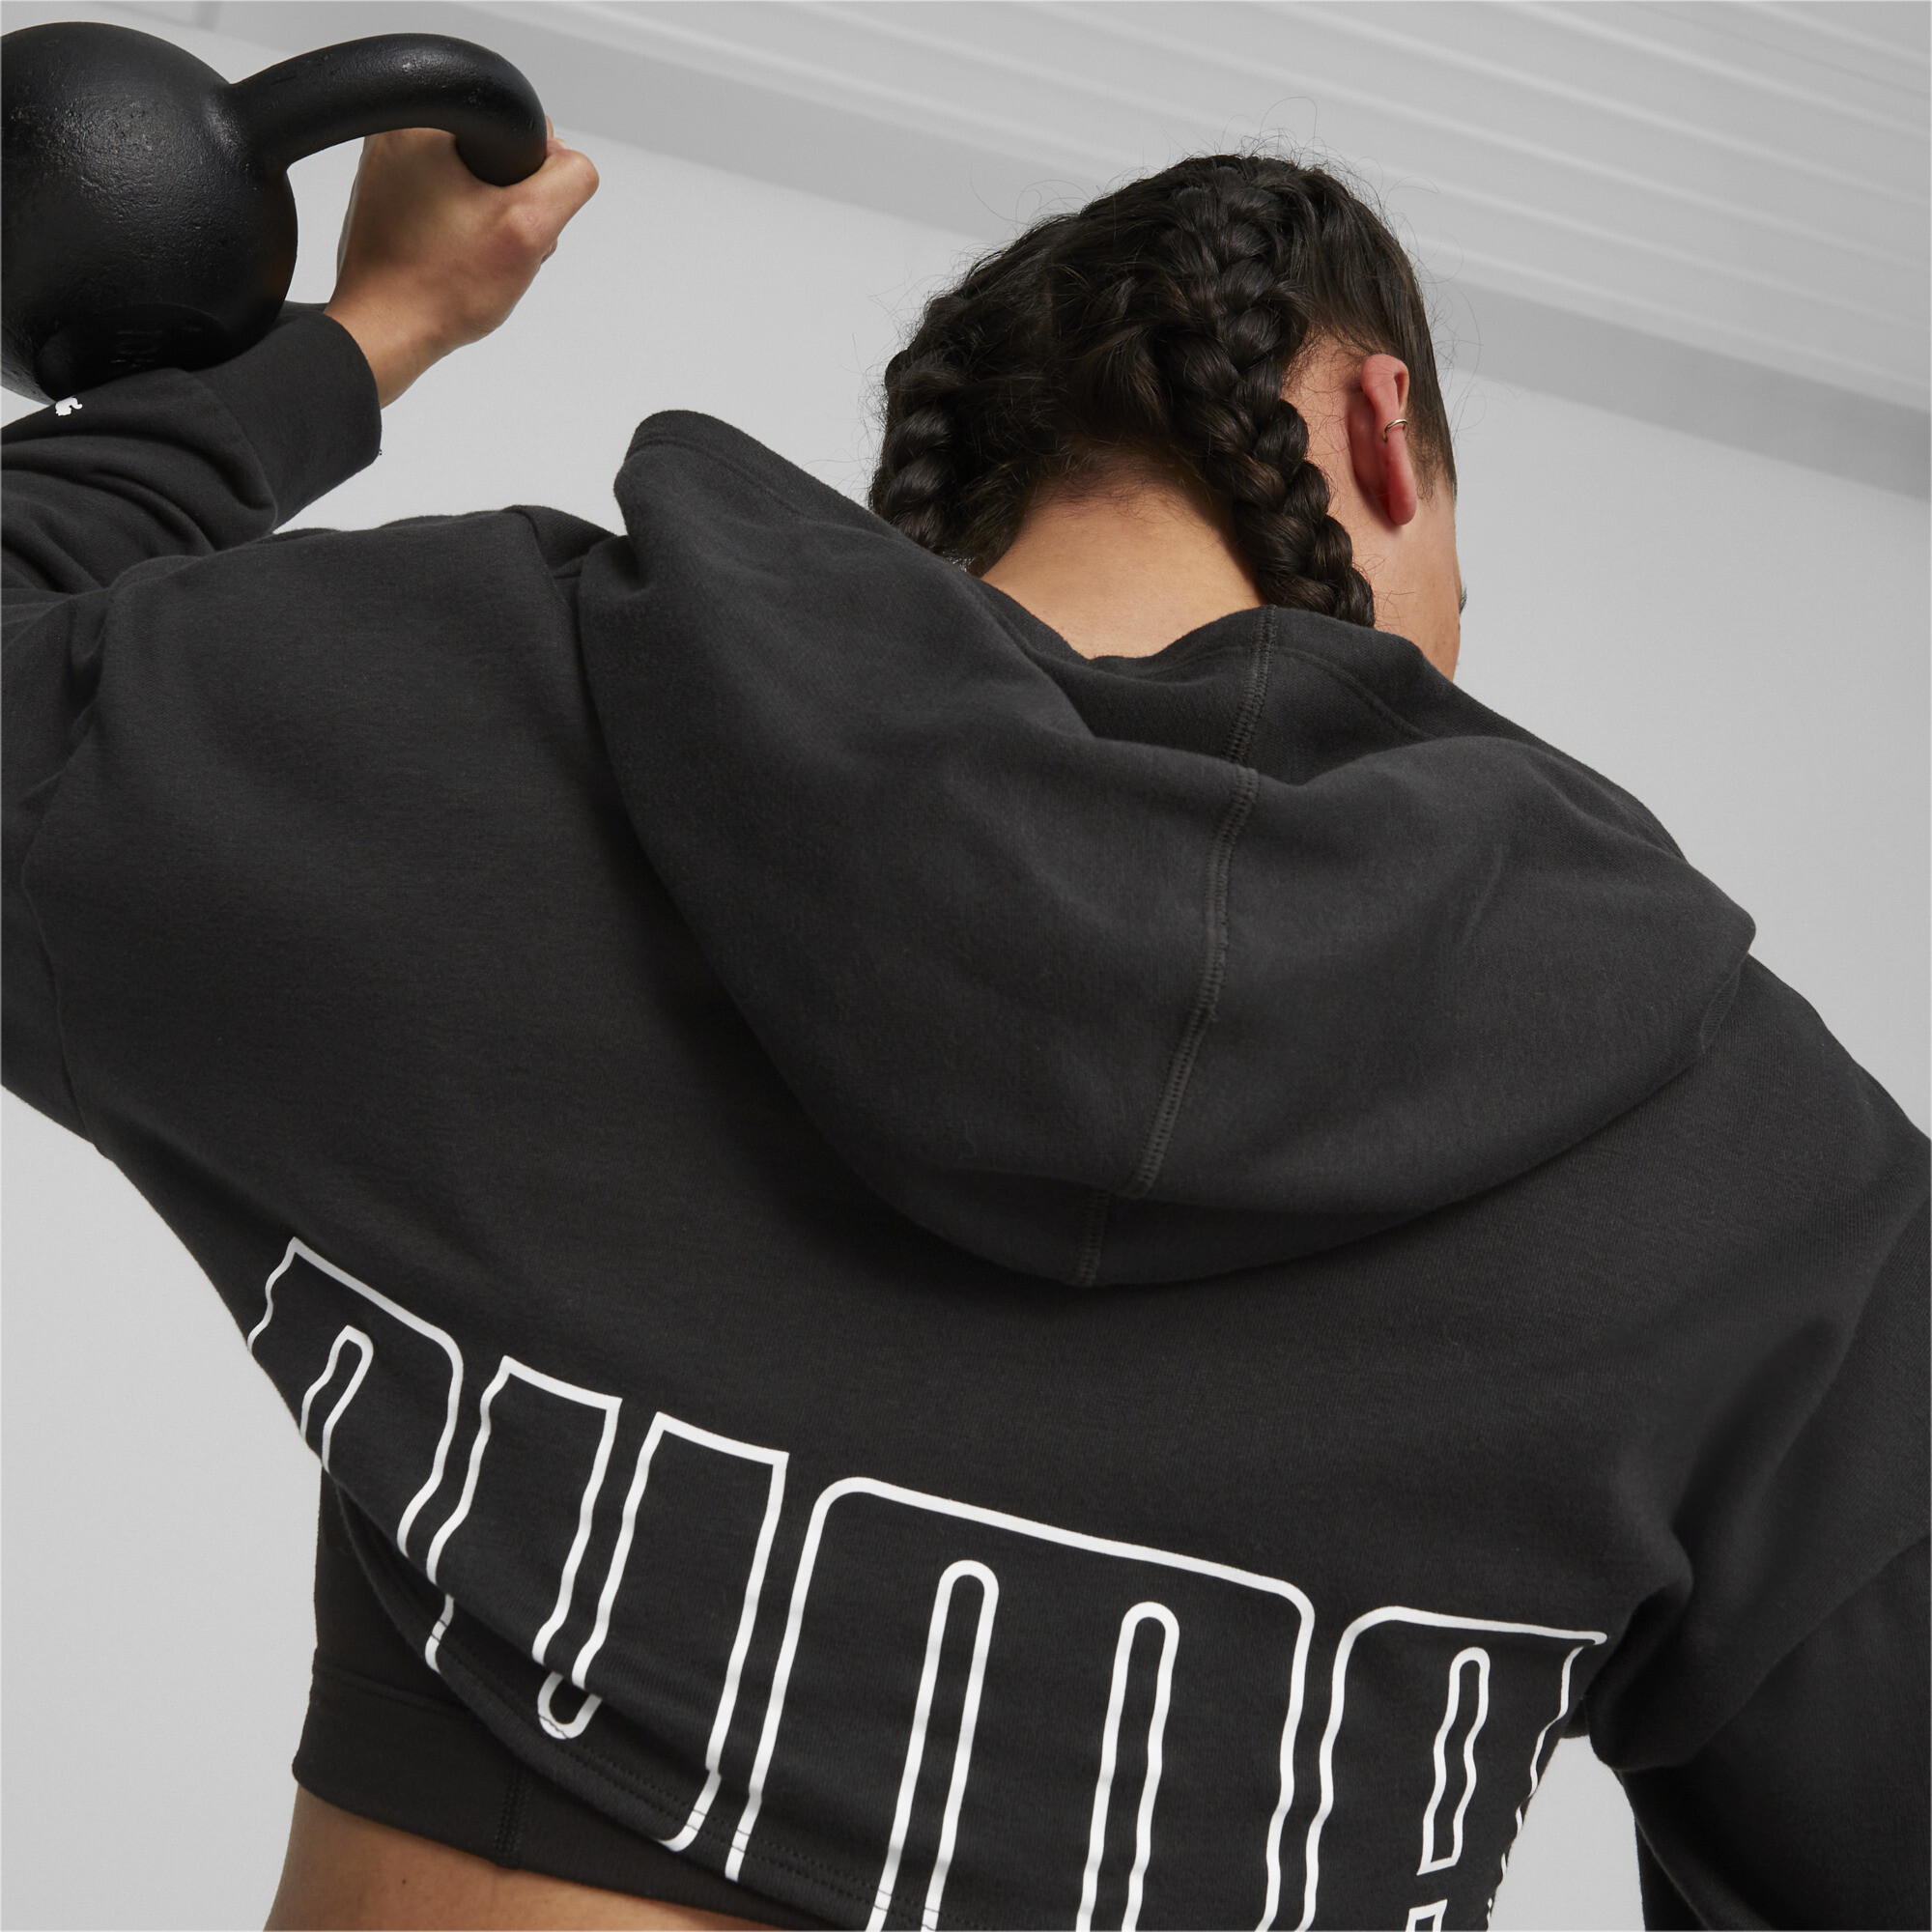 Women's PUMA FIT MOVE Cropped Training Hoodie In Black, Size Small